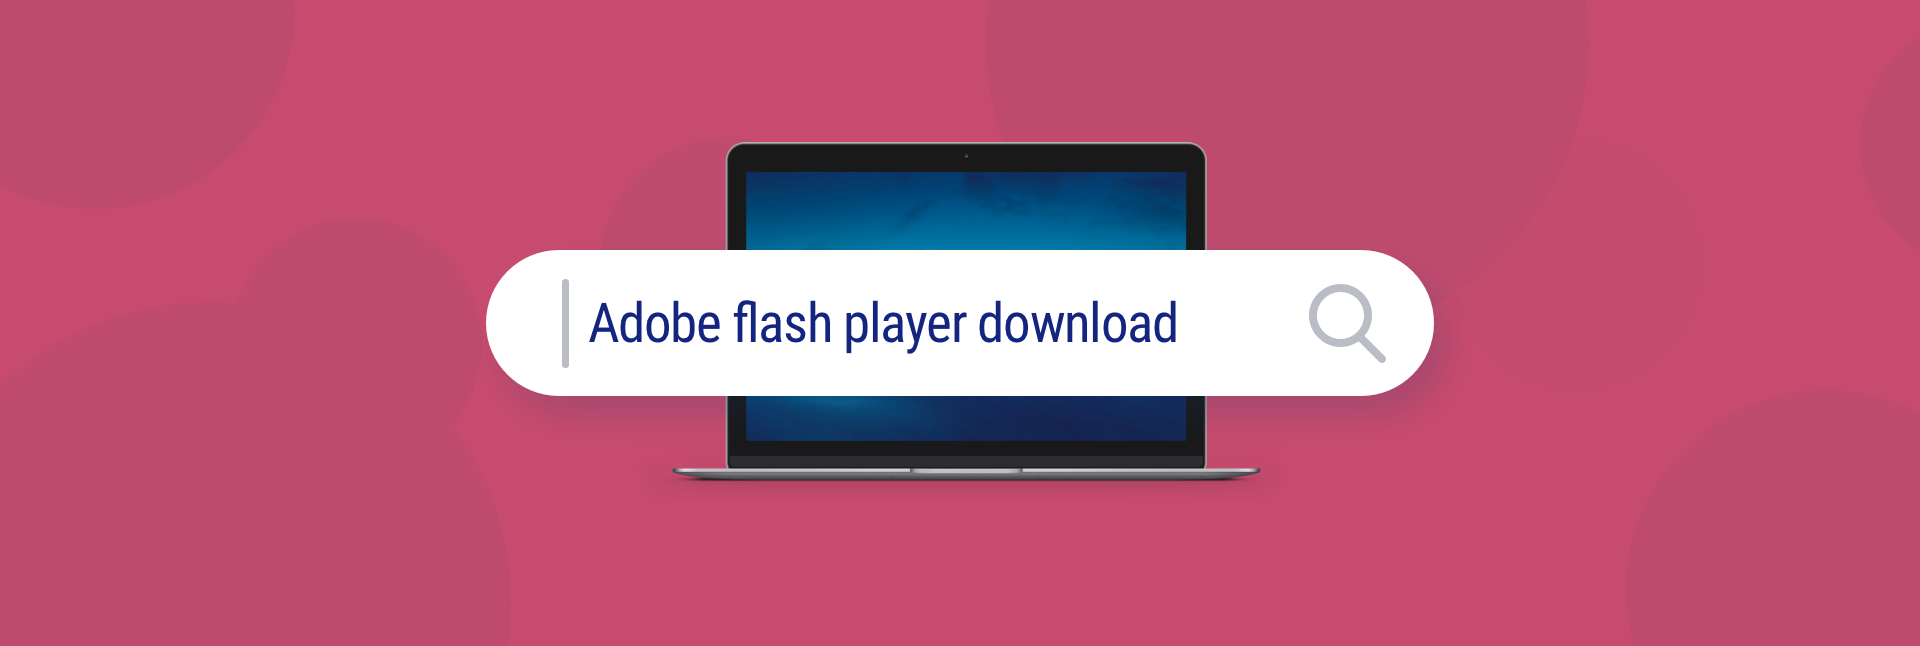 free download chrome adobe flash player for windows 10